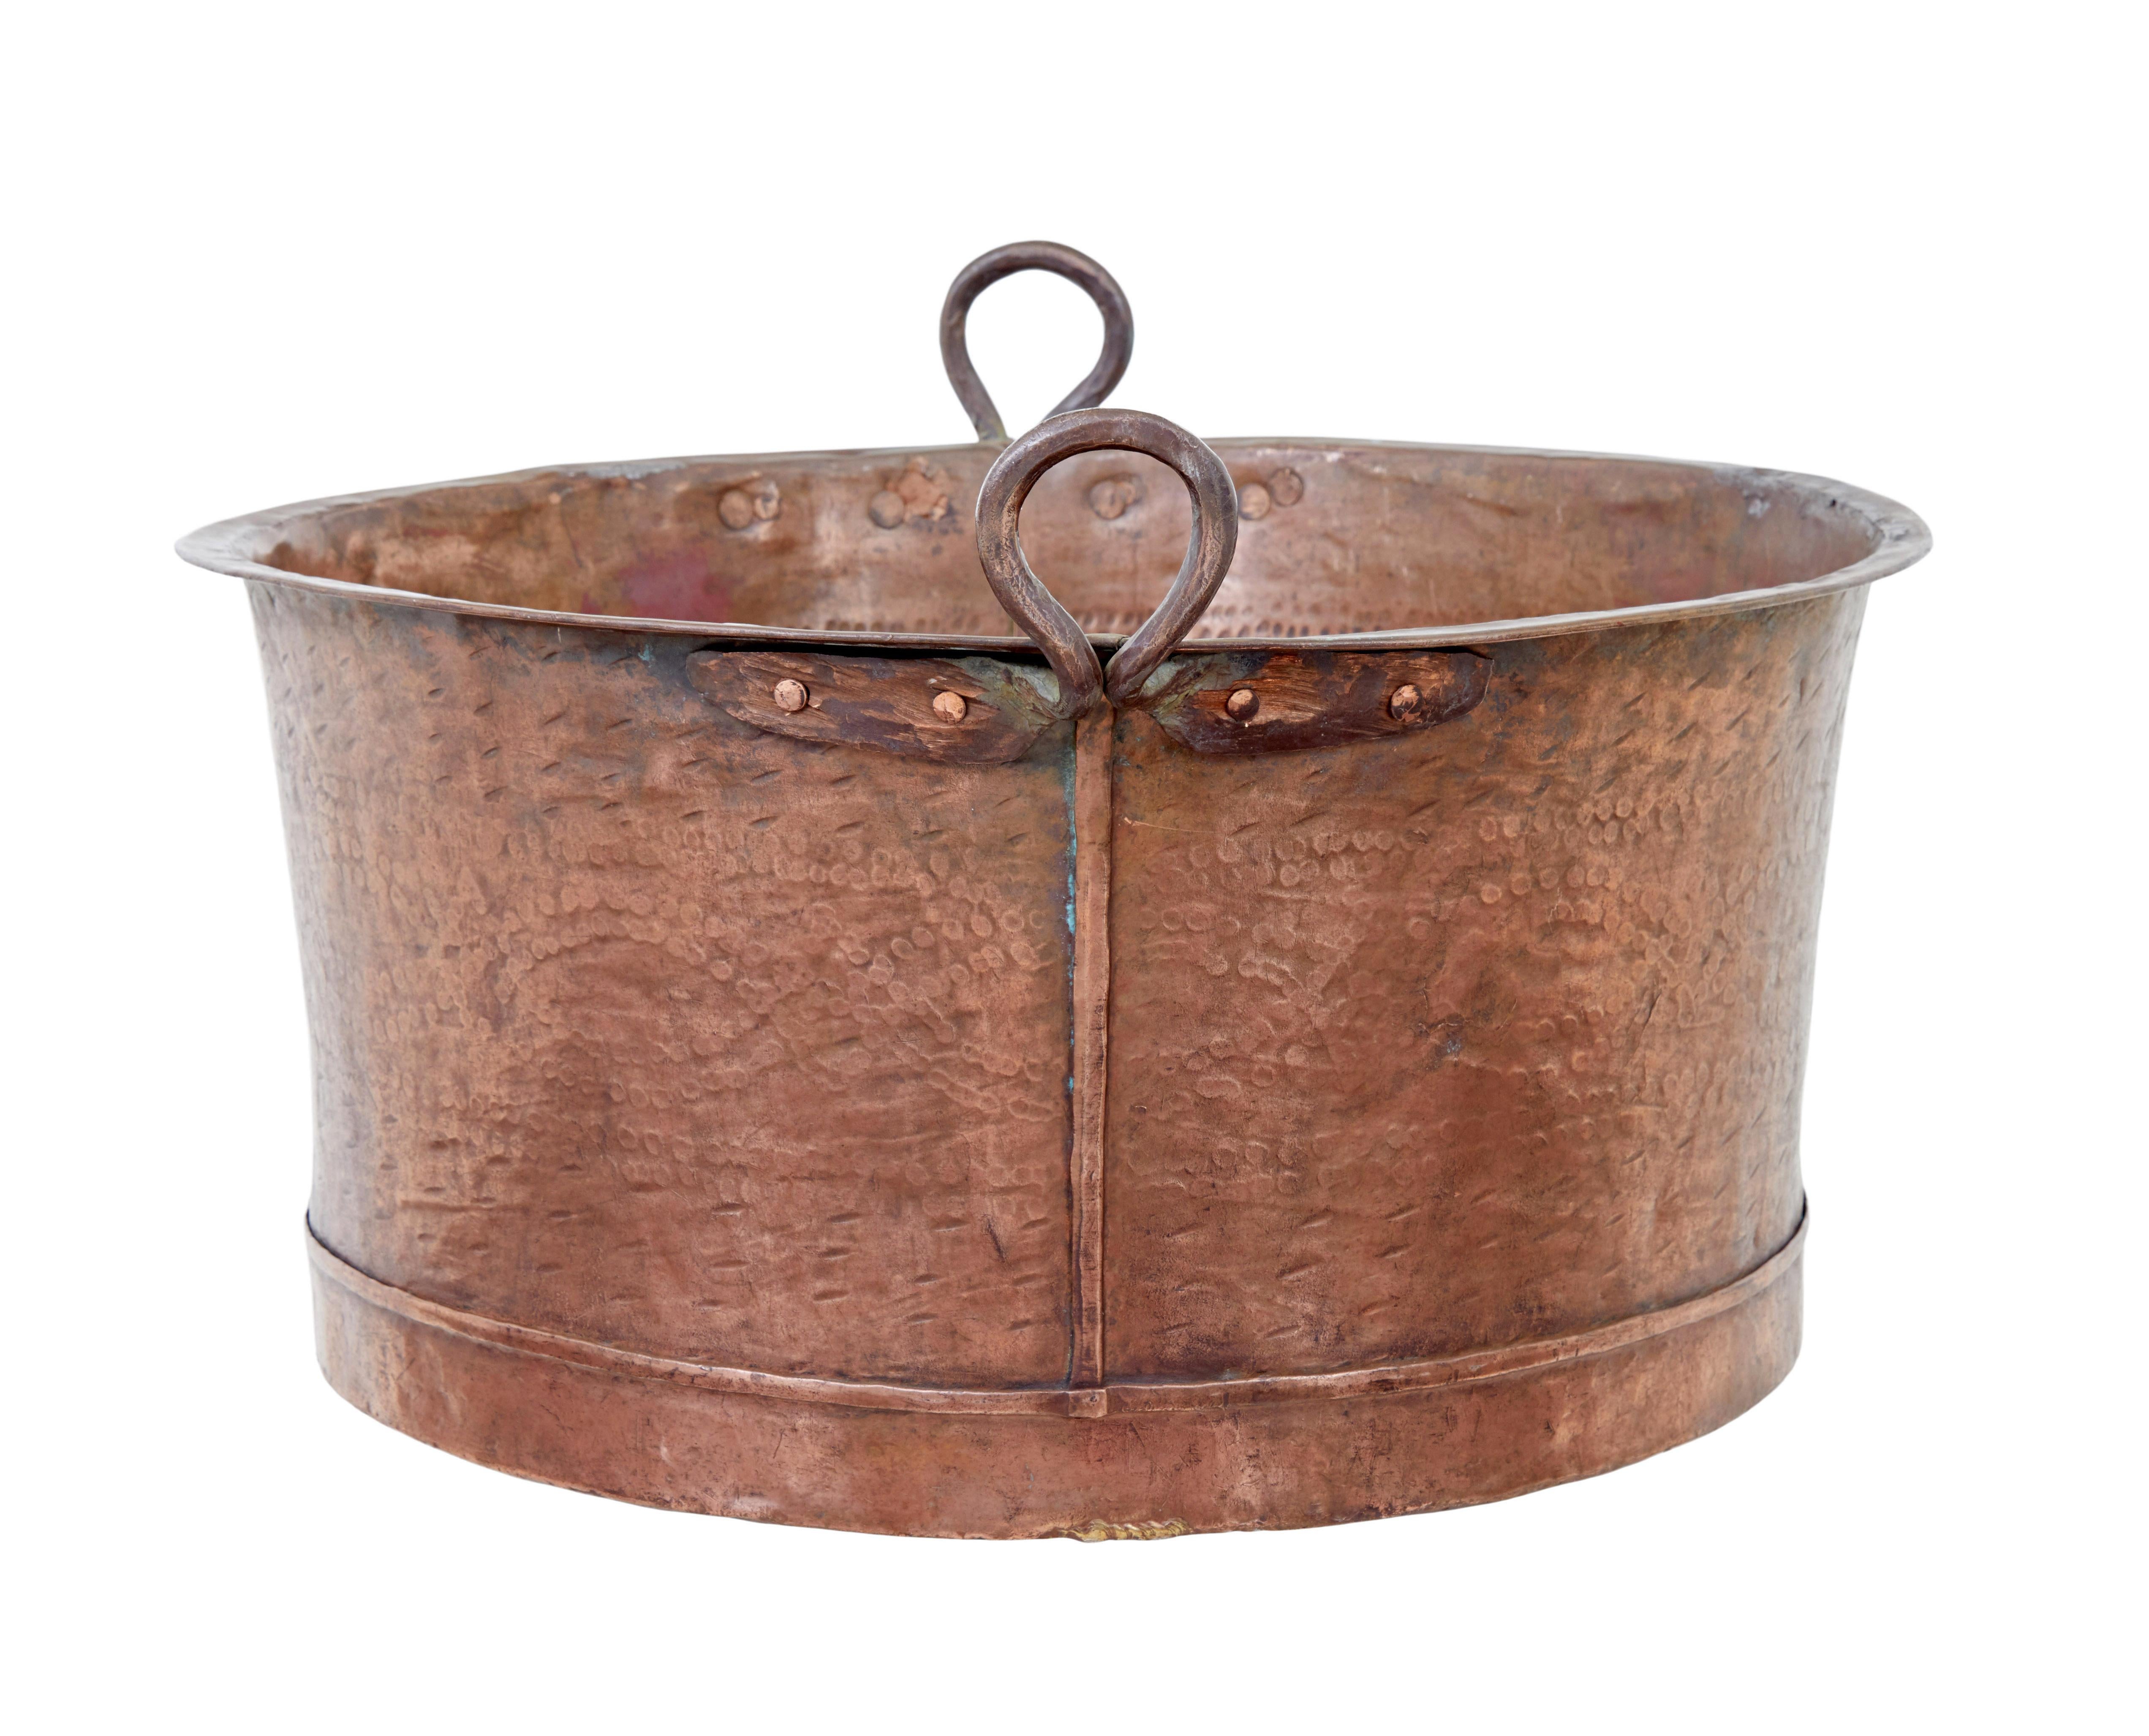 Etched Victorian 19th century large copper cooking pot For Sale